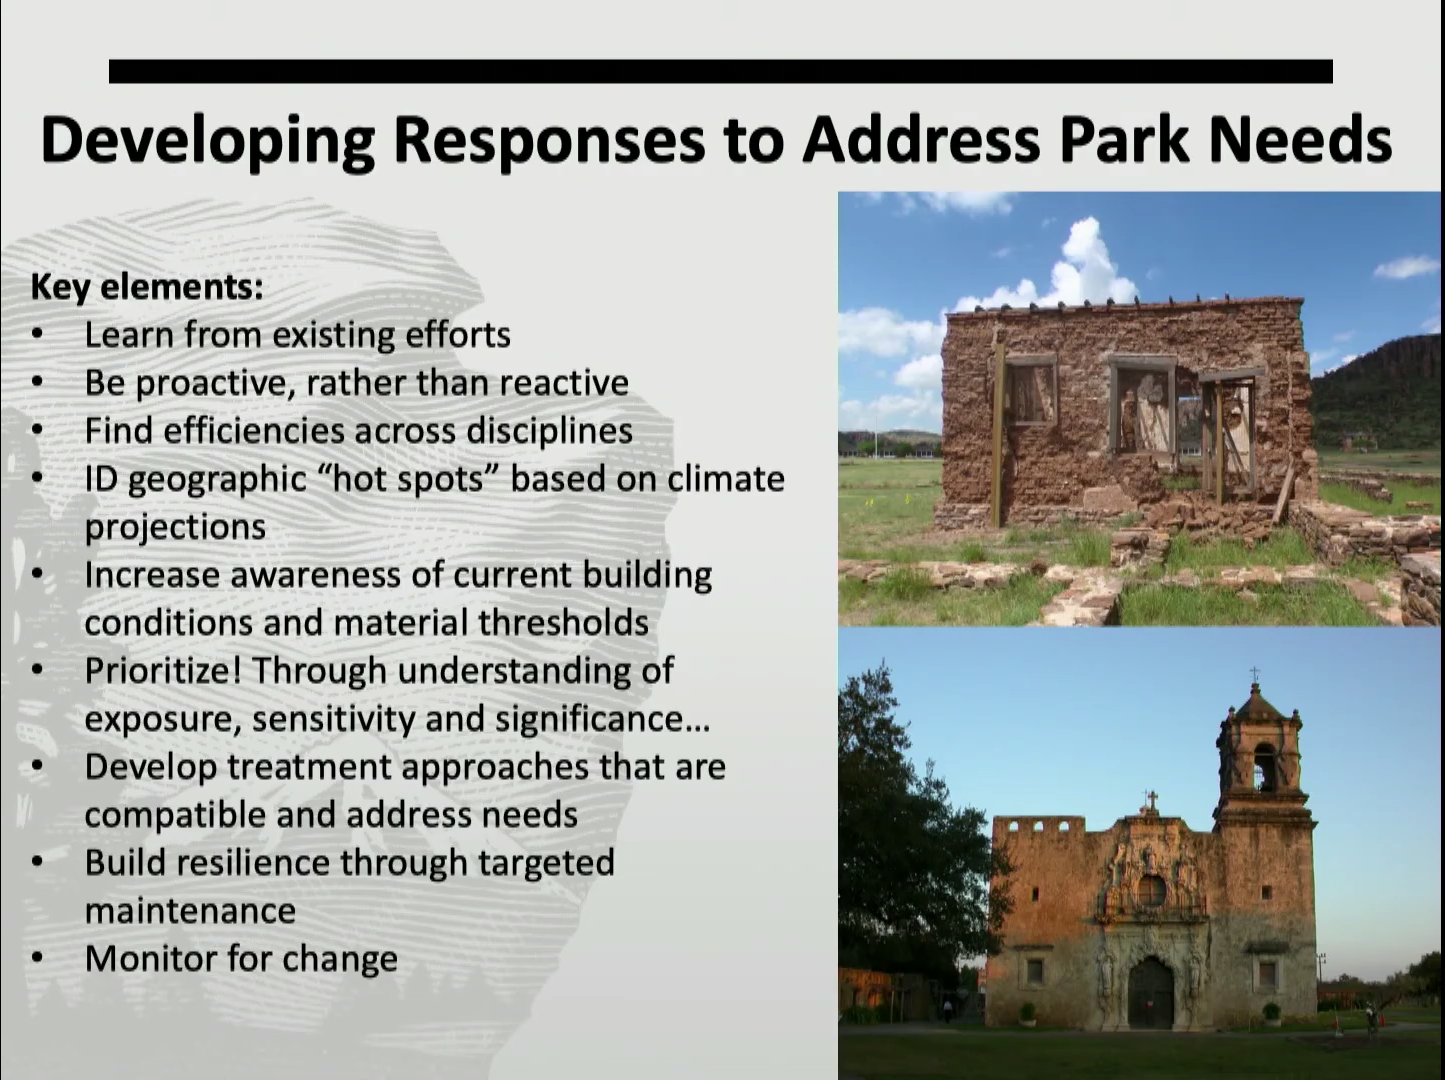 Key elements discussed in the text, photo of an earthen structure deteriorating, weathering of a church.